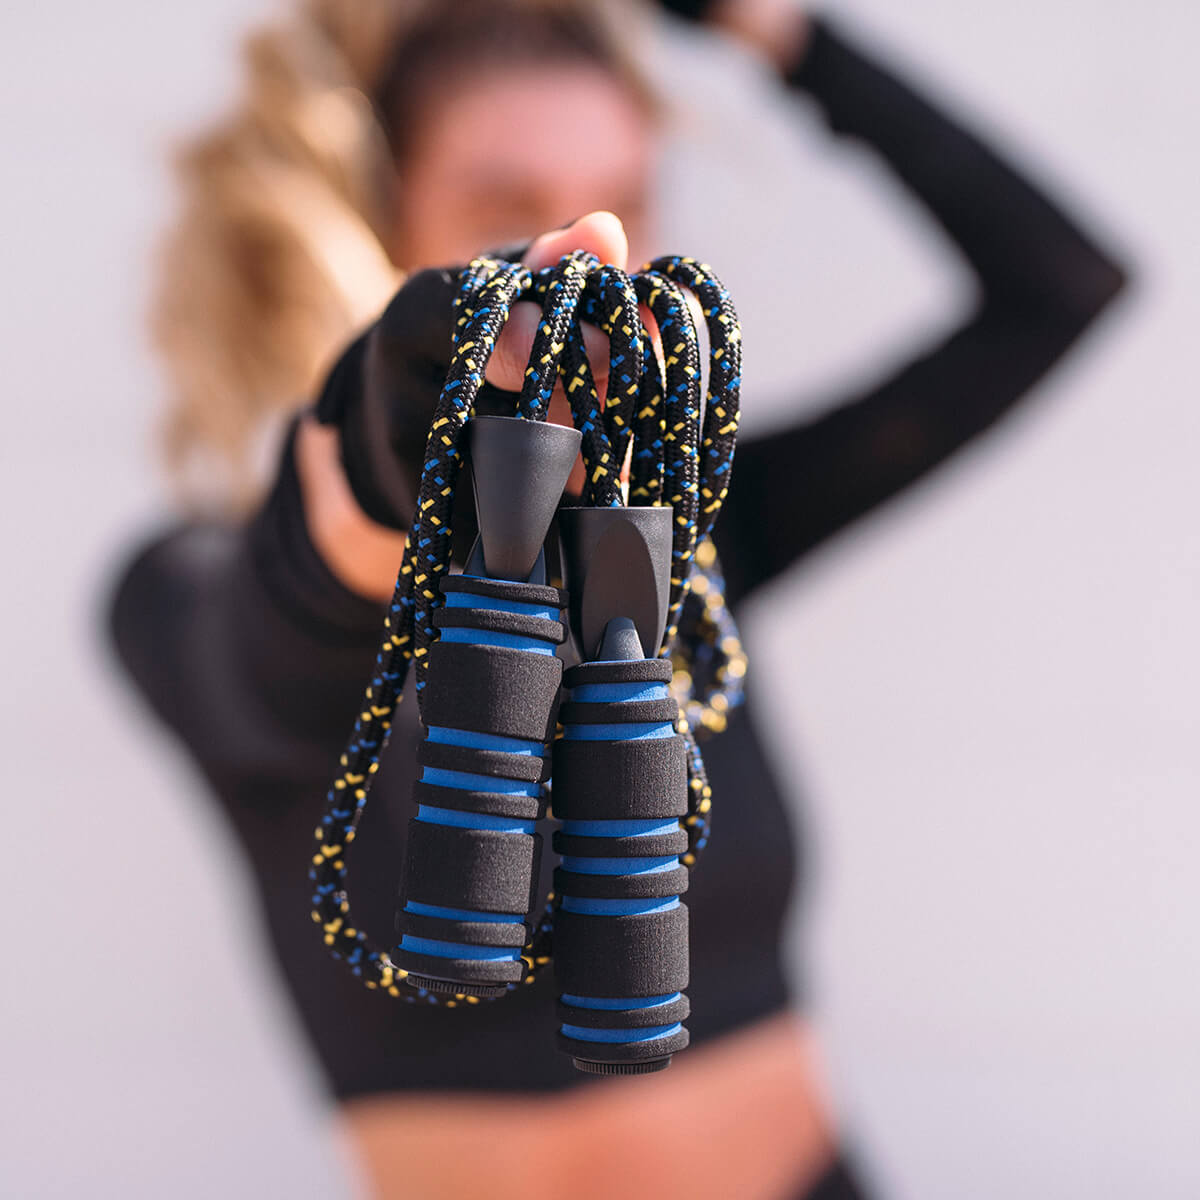 A blonde woman wearing black and showing her midriff hands a jump rope toward the camera. The black ripe is connected to a pair of black handles with seven blue stripes.